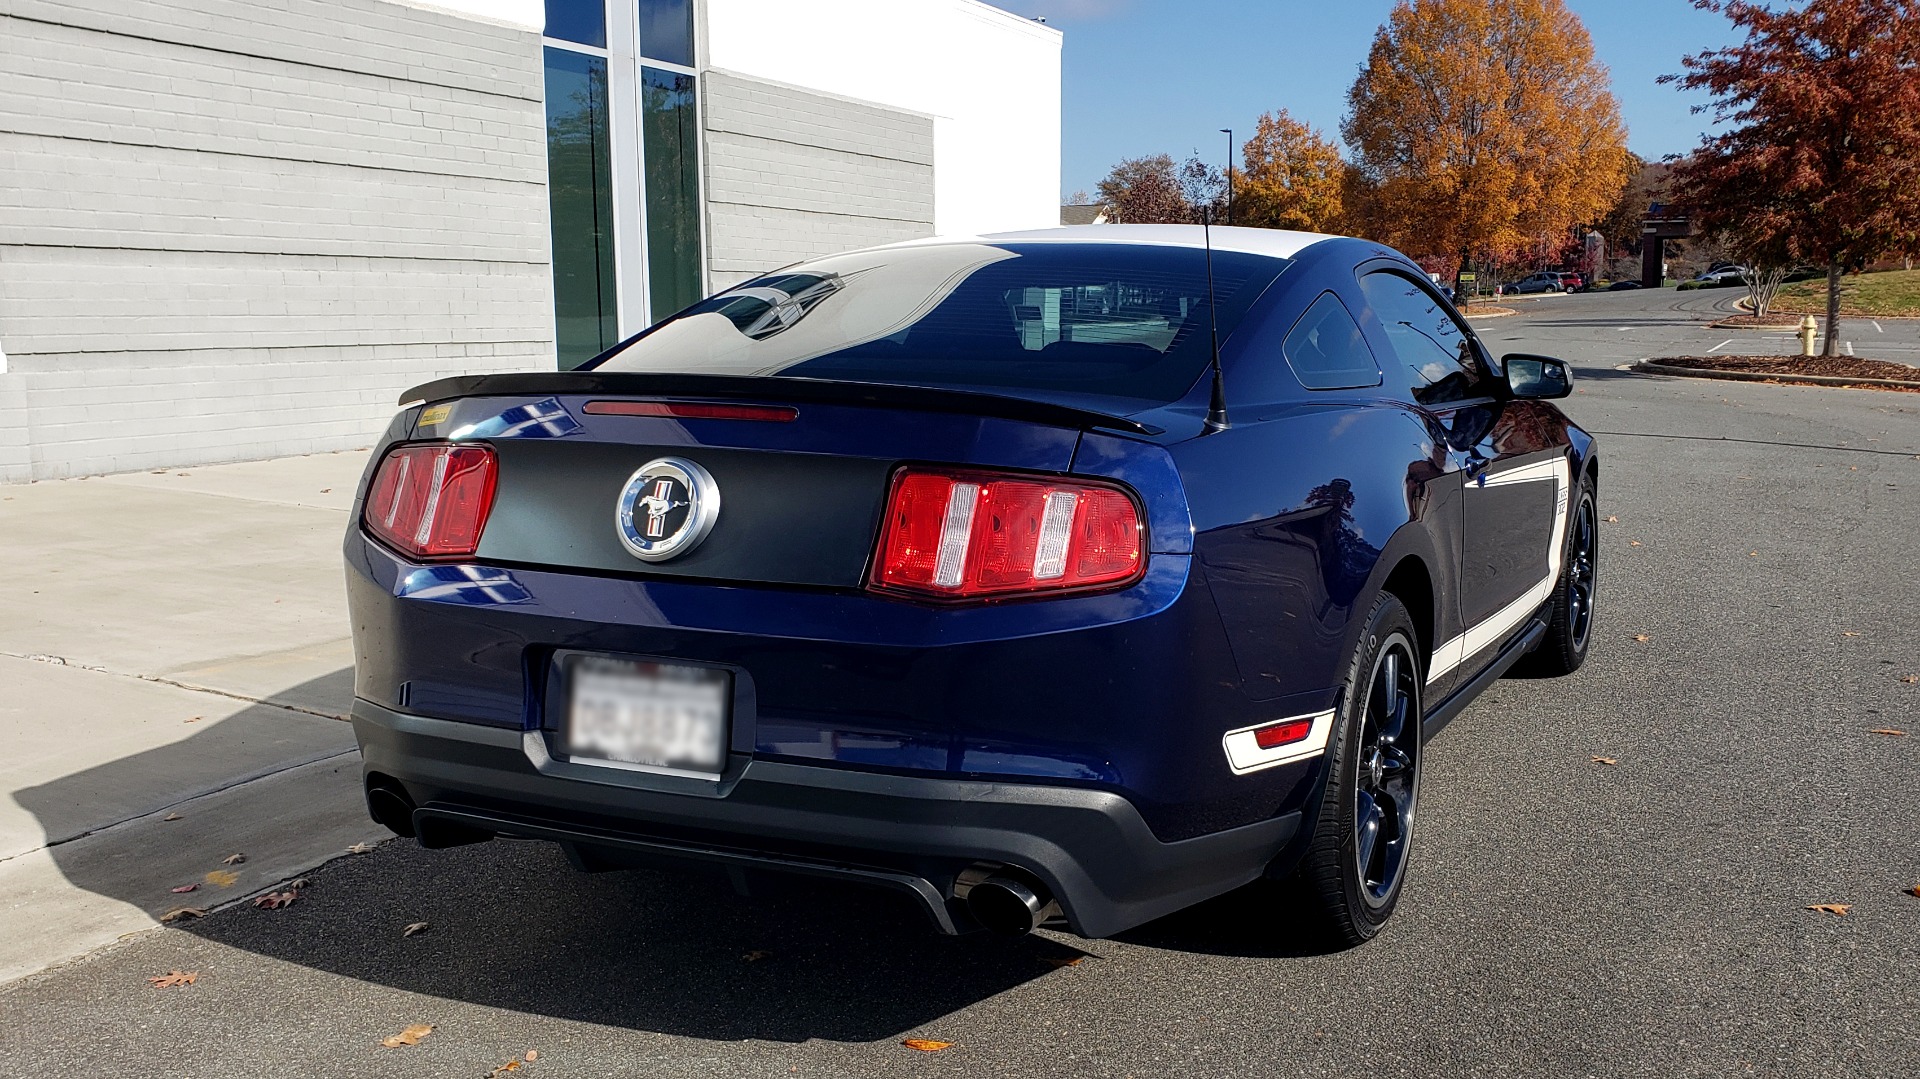 Used 2012 Ford MUSTANG BOSS 302 COUPE / 5.0L / 6-SPD MAN / RECARO SEATS / 3.73 GEARS for sale Sold at Formula Imports in Charlotte NC 28227 11